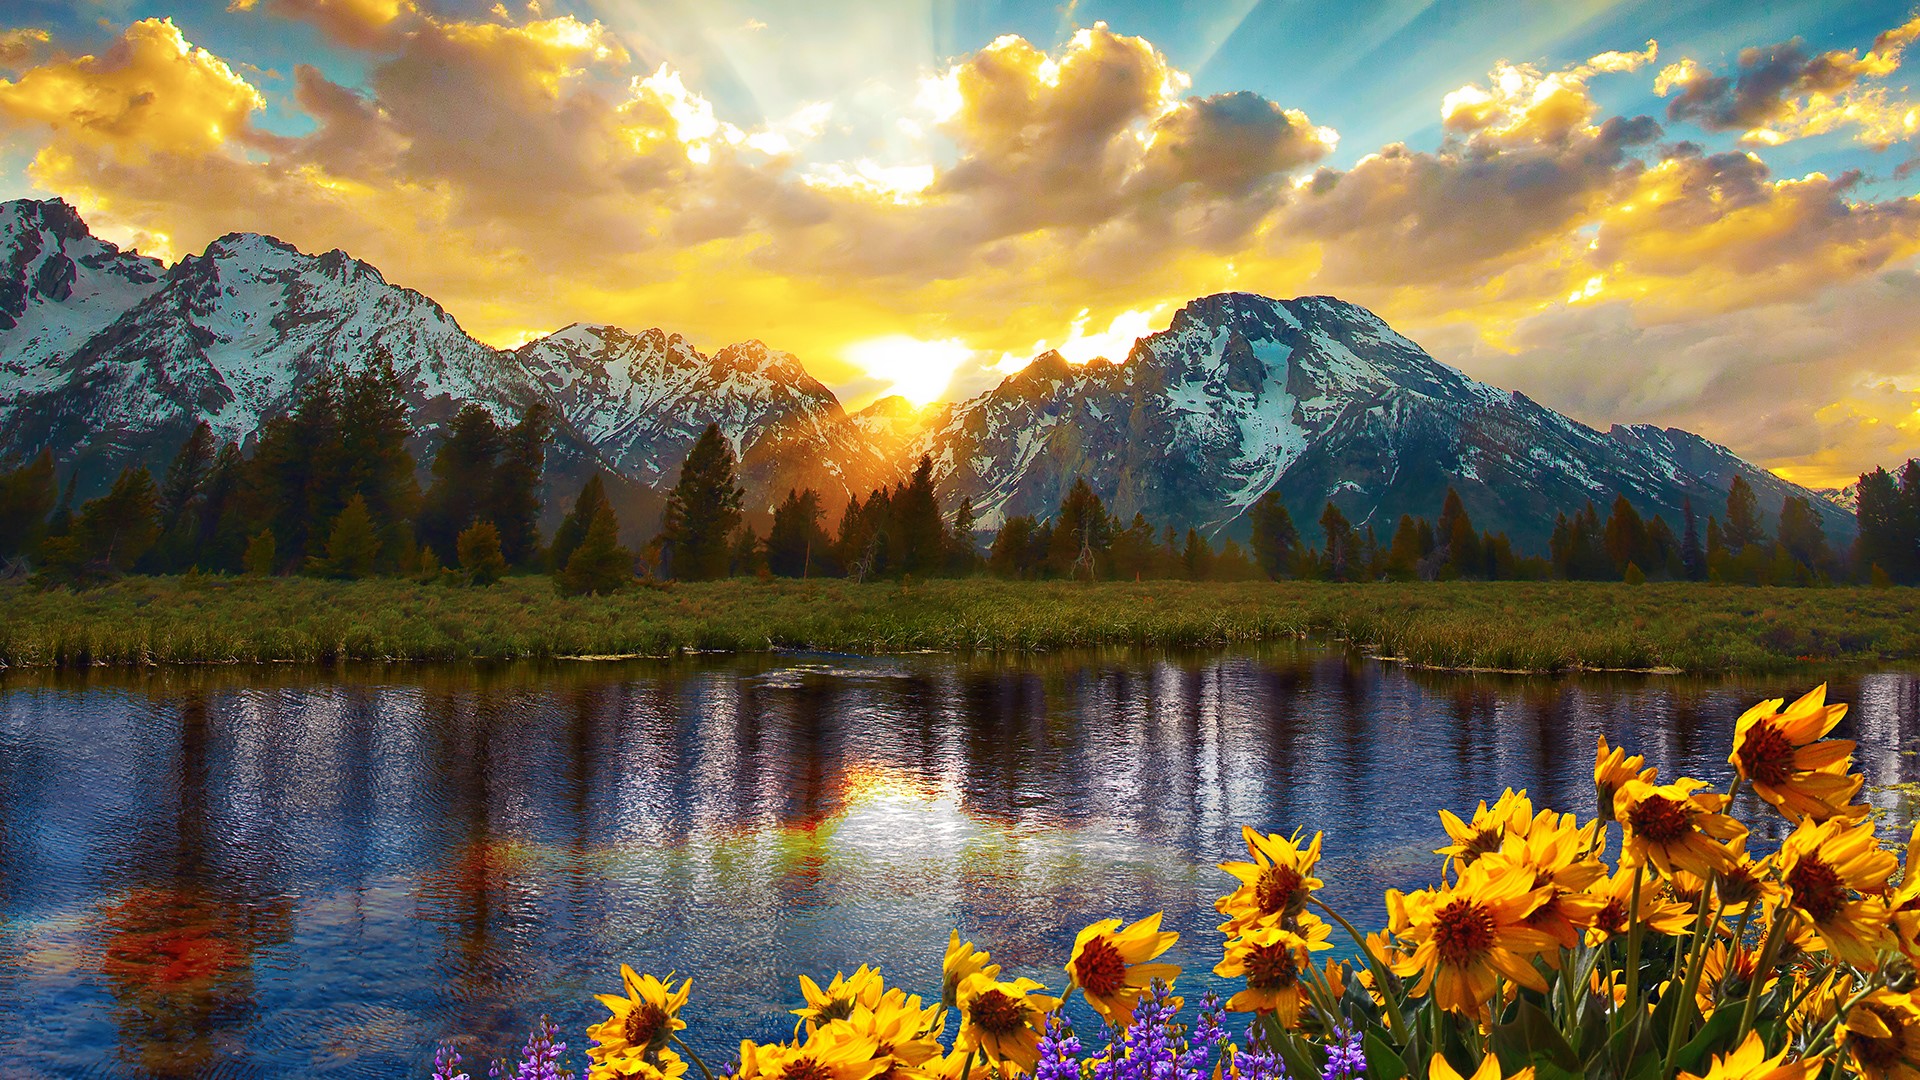 General 1920x1080 nature landscape flowers clouds sky mountains sun rays sunflowers river Grand Teton National Park Wyoming USA